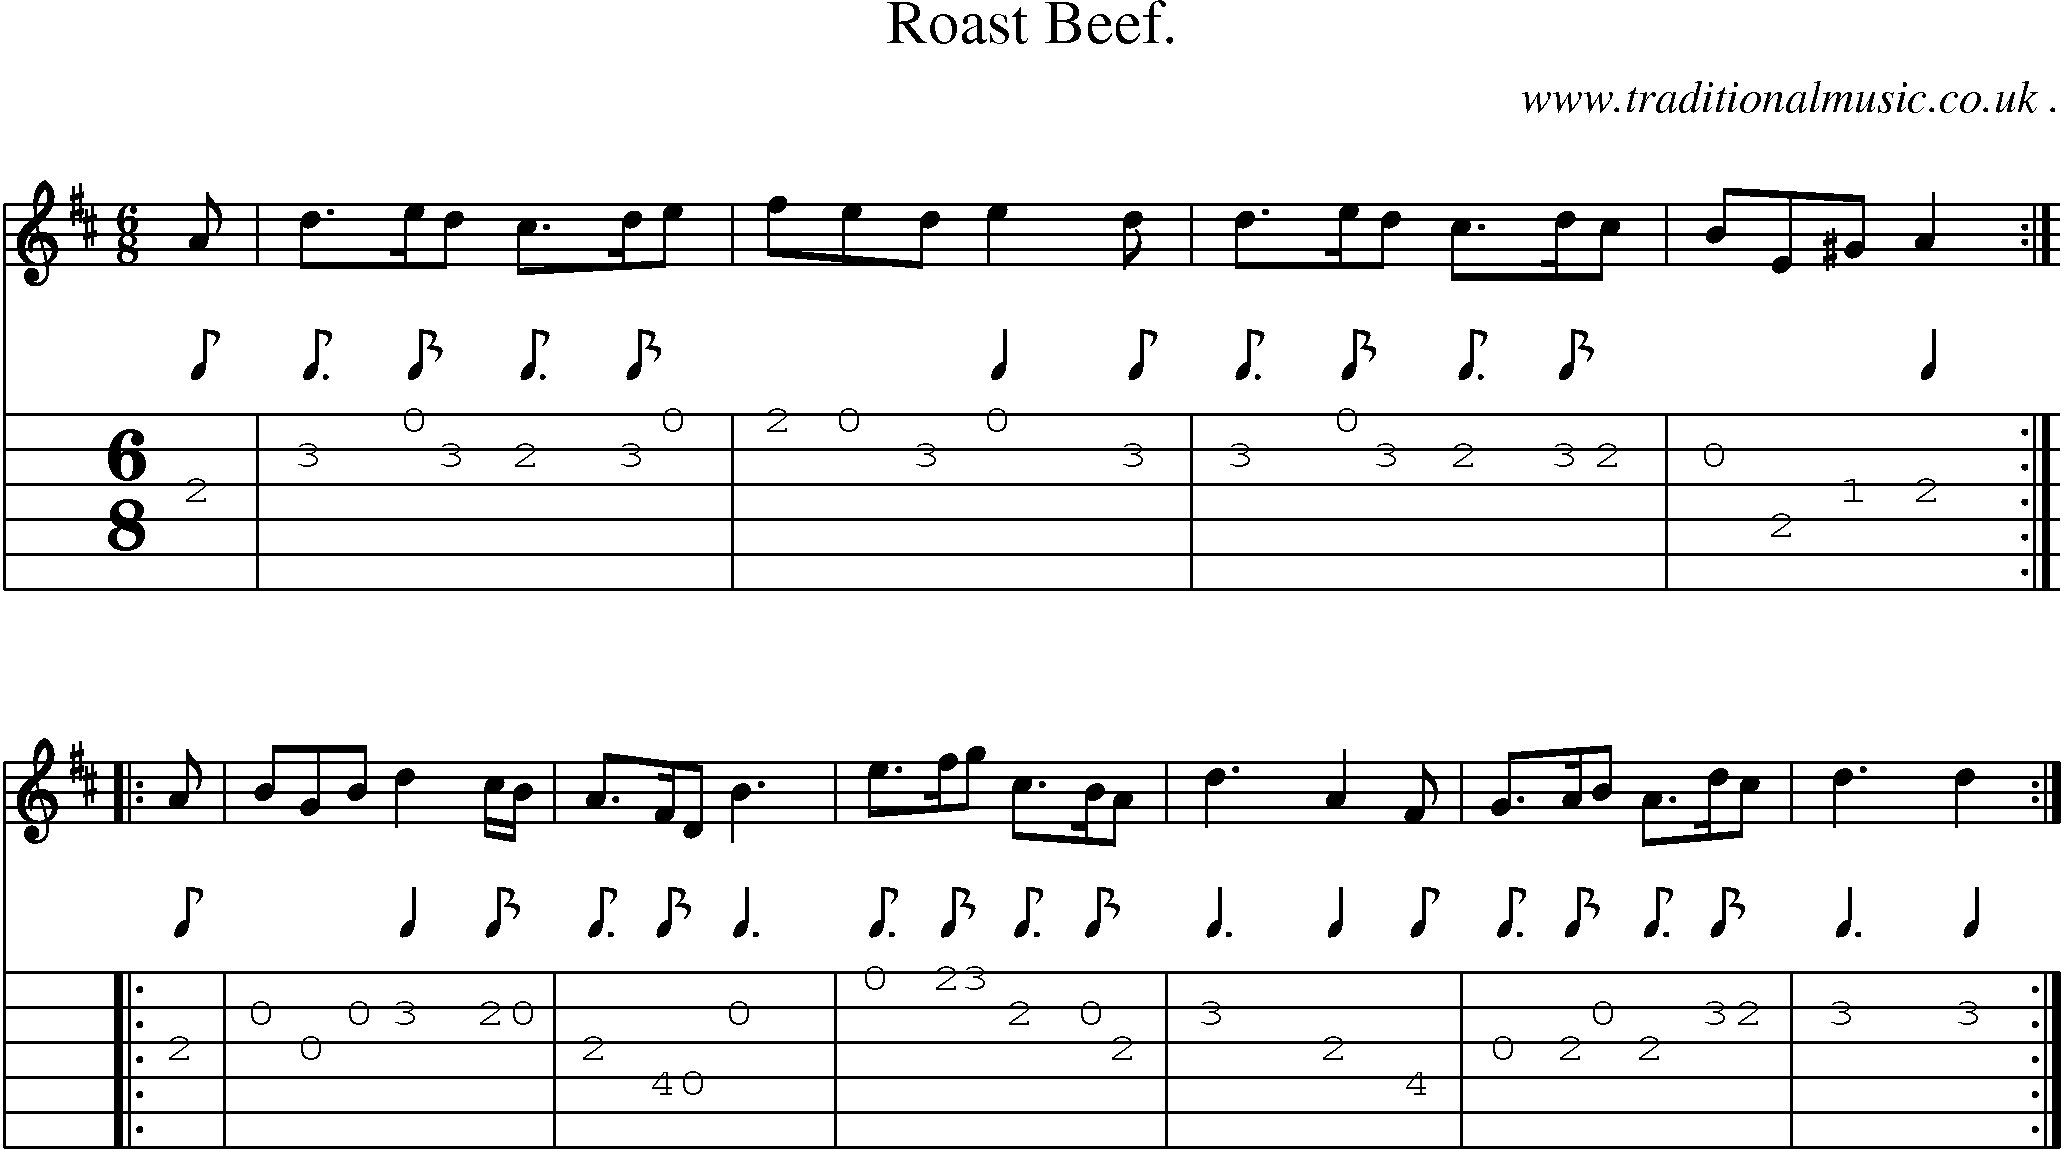 Sheet-Music and Guitar Tabs for Roast Beef